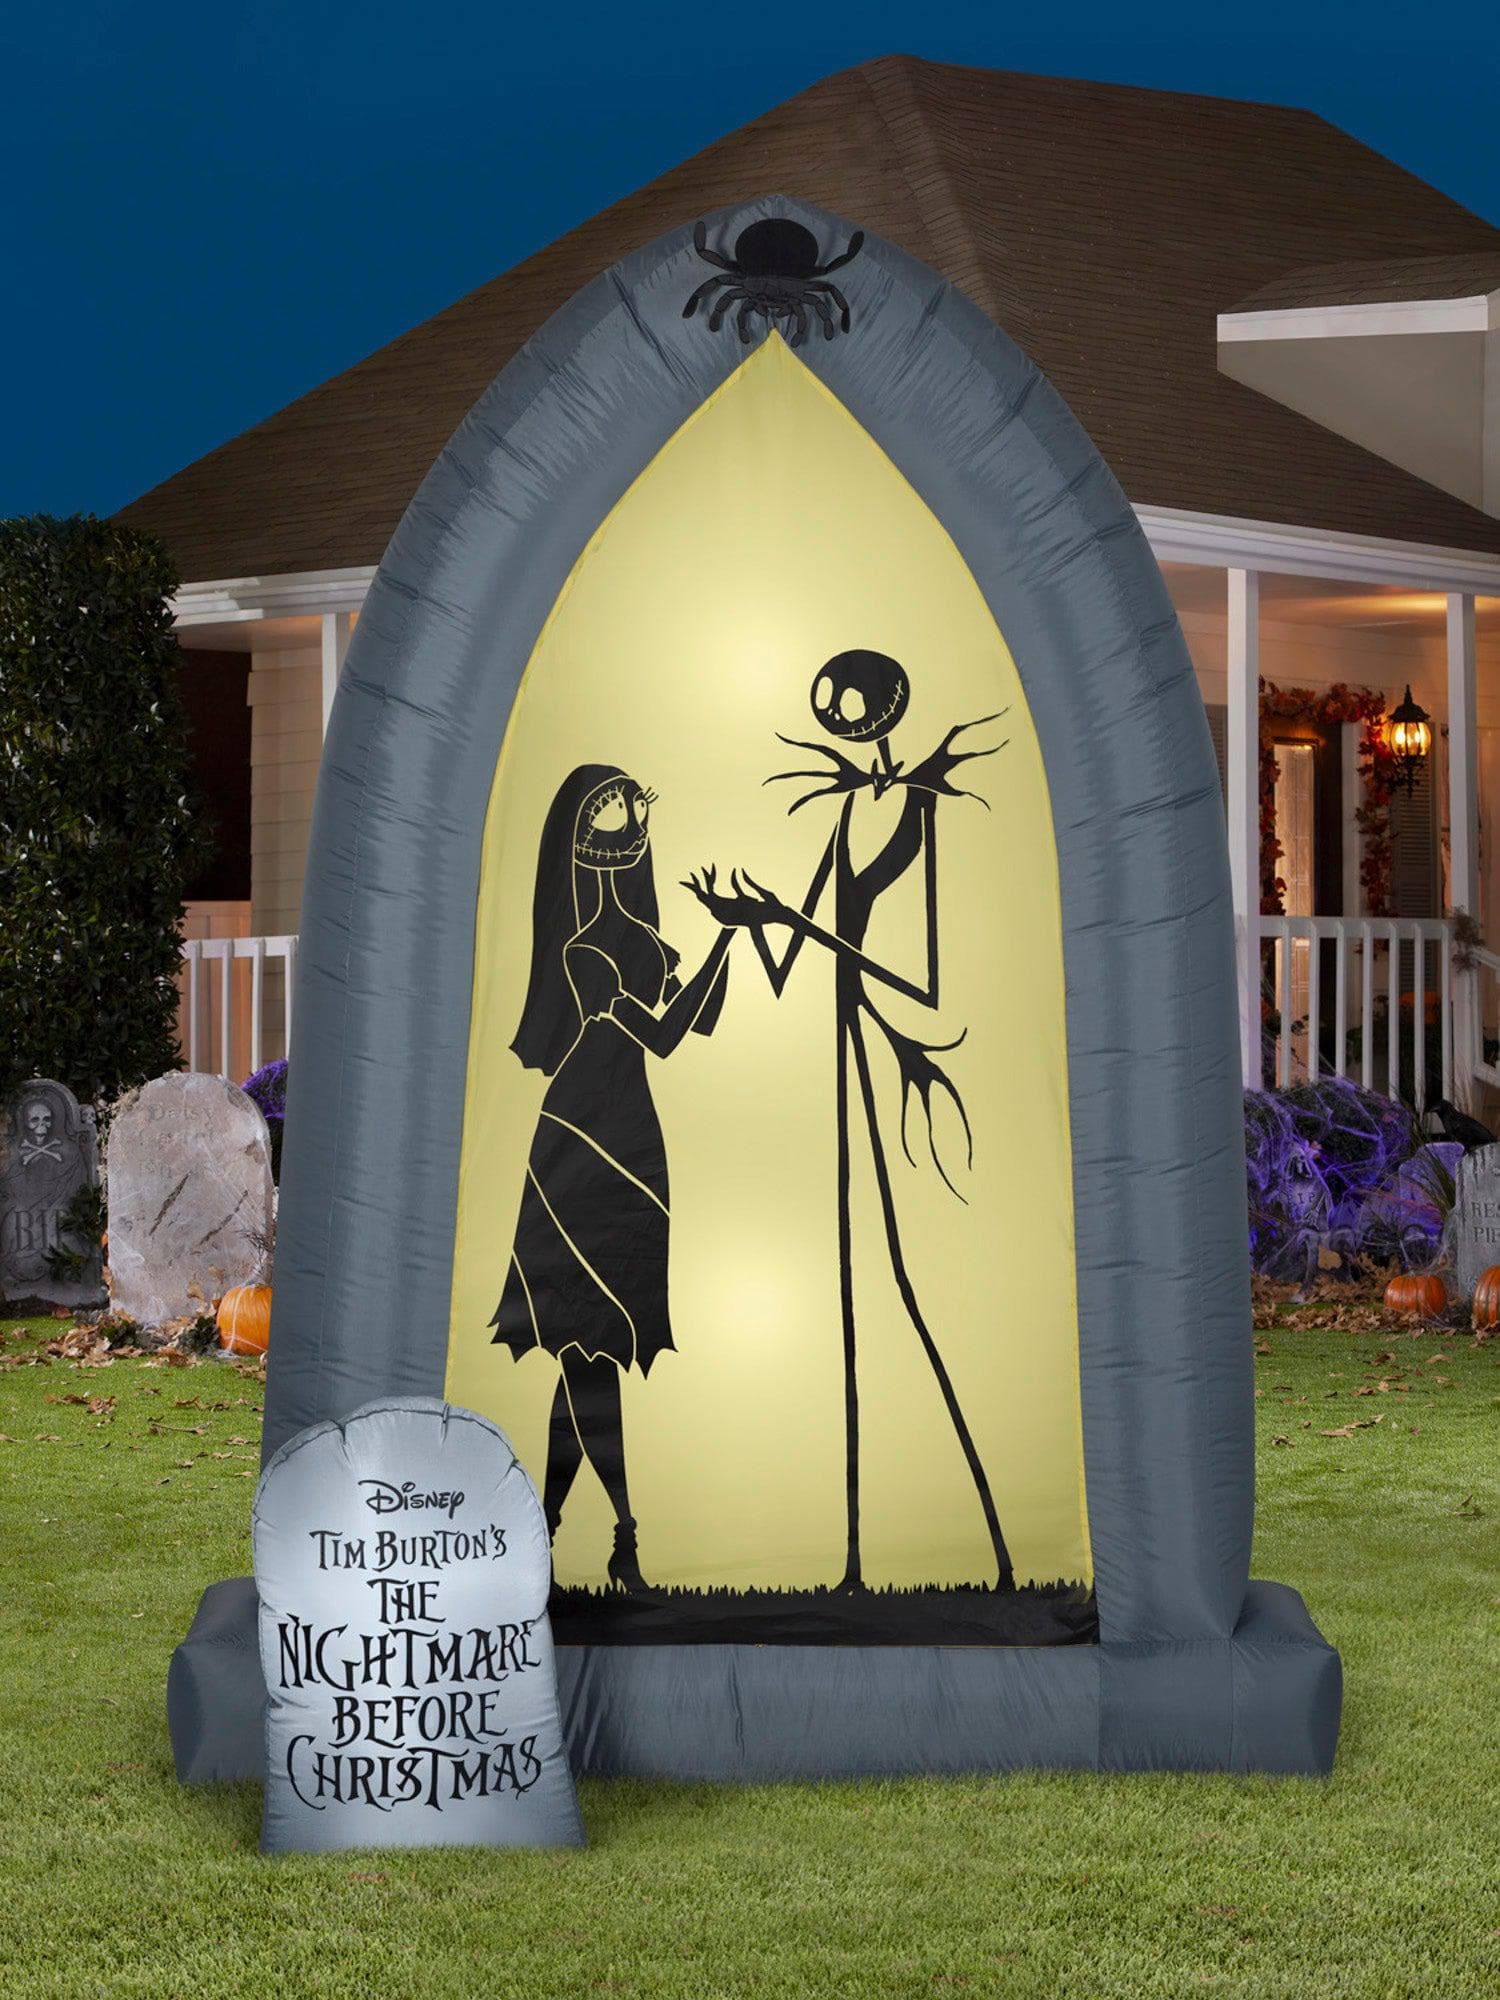 7 Foot The Nightmare Before Christmas Jack and Sally Silhouette Light Up Halloween Inflatable Lawn Decor - costumes.com